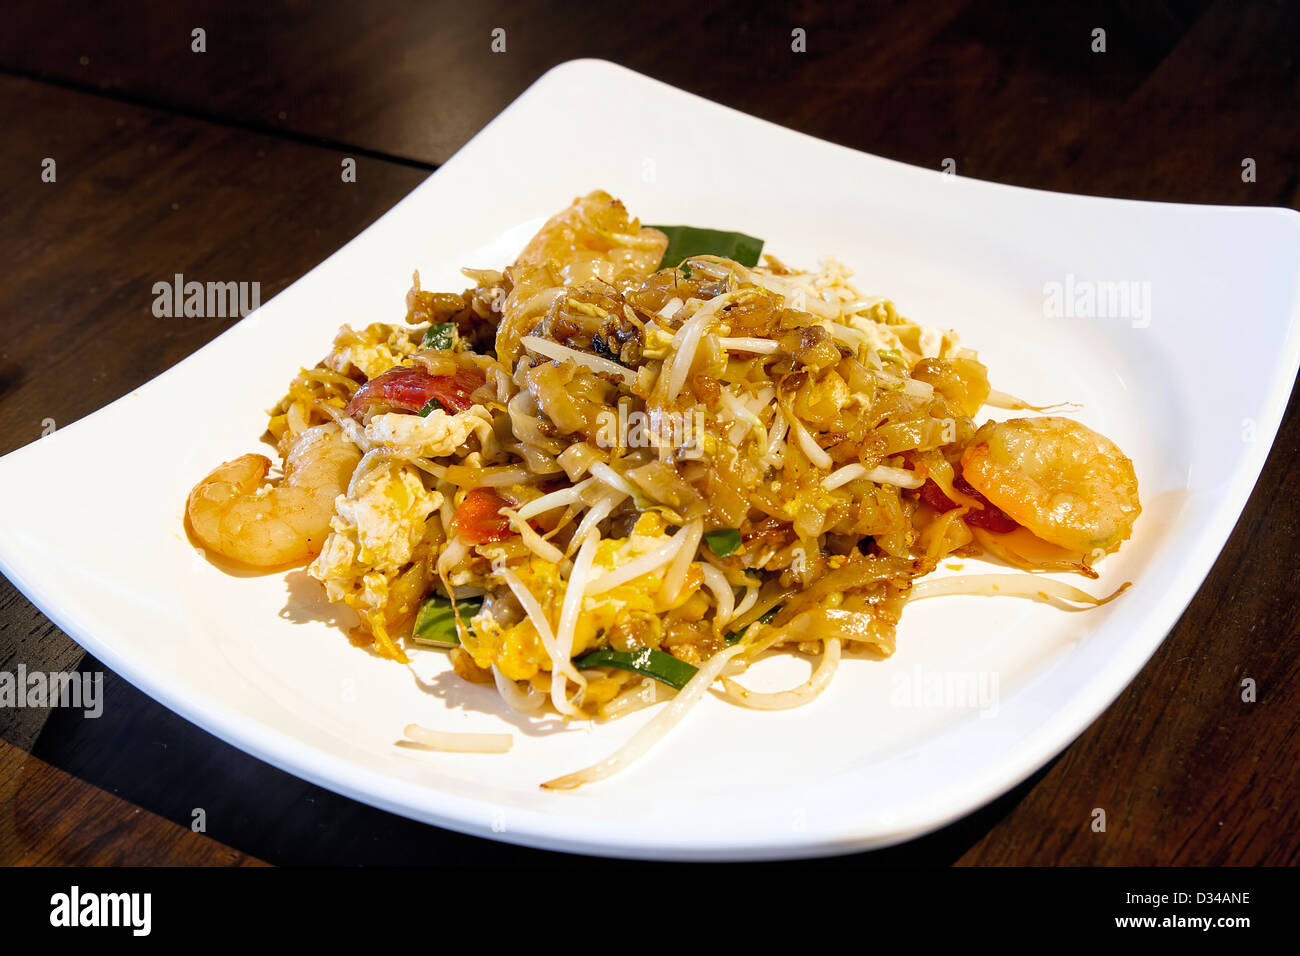 Plate of Penang Fried Kway Teow Noodles with Prawns Chinese Sausage Eggs Green Chives and Bean Sprouts Stock Photo